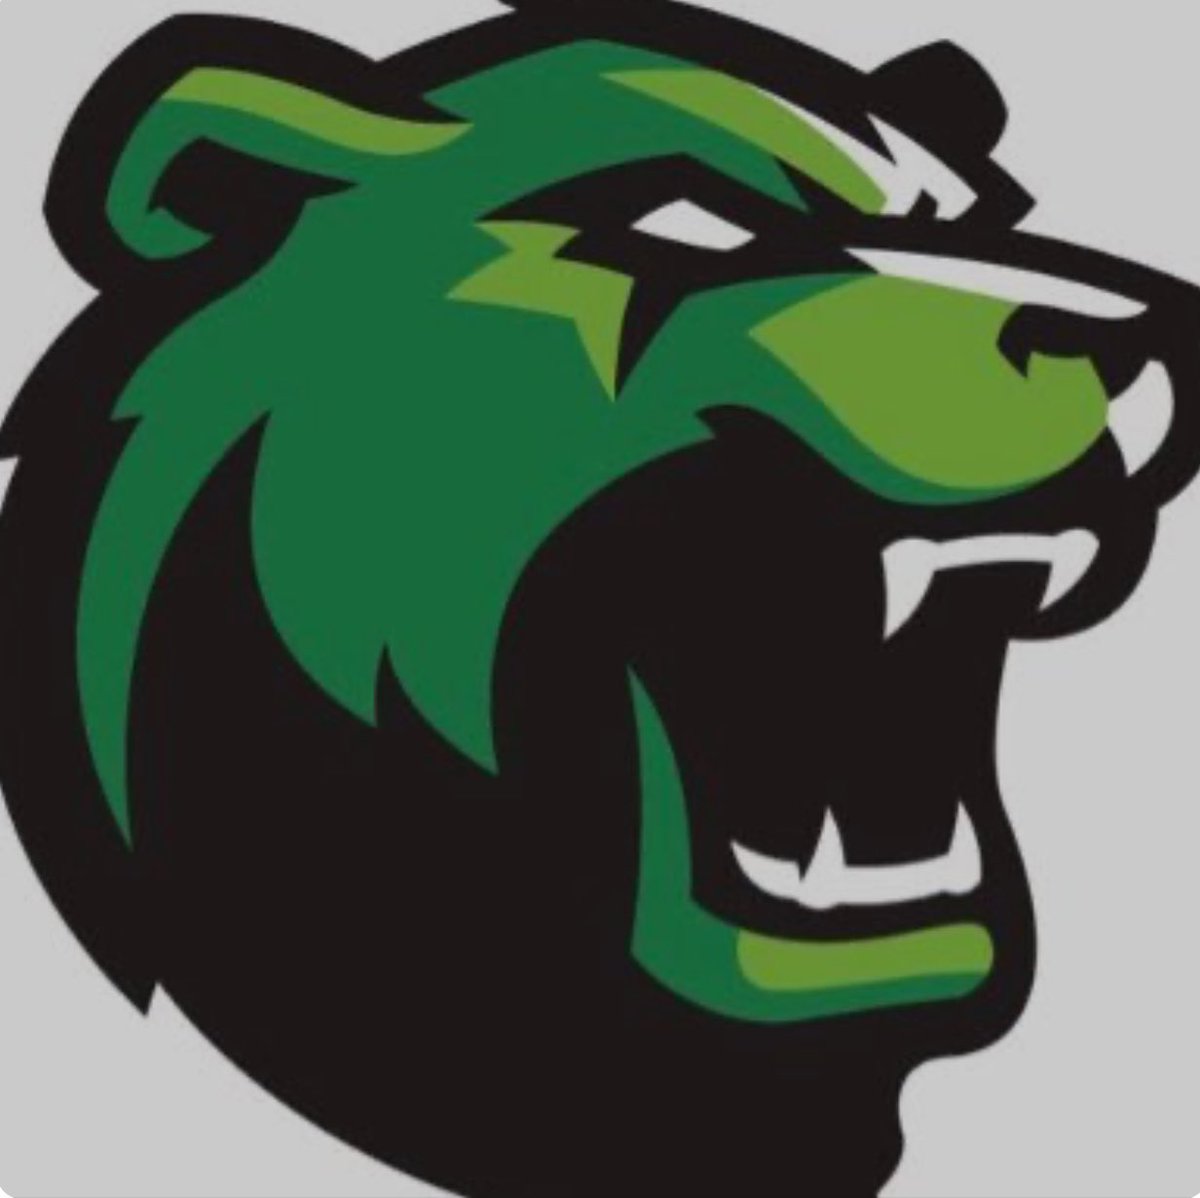 After a great conversation with Coach McGill, I’m blessed to have receive an offer from Dallas college Brookhaven @BCBearsDen